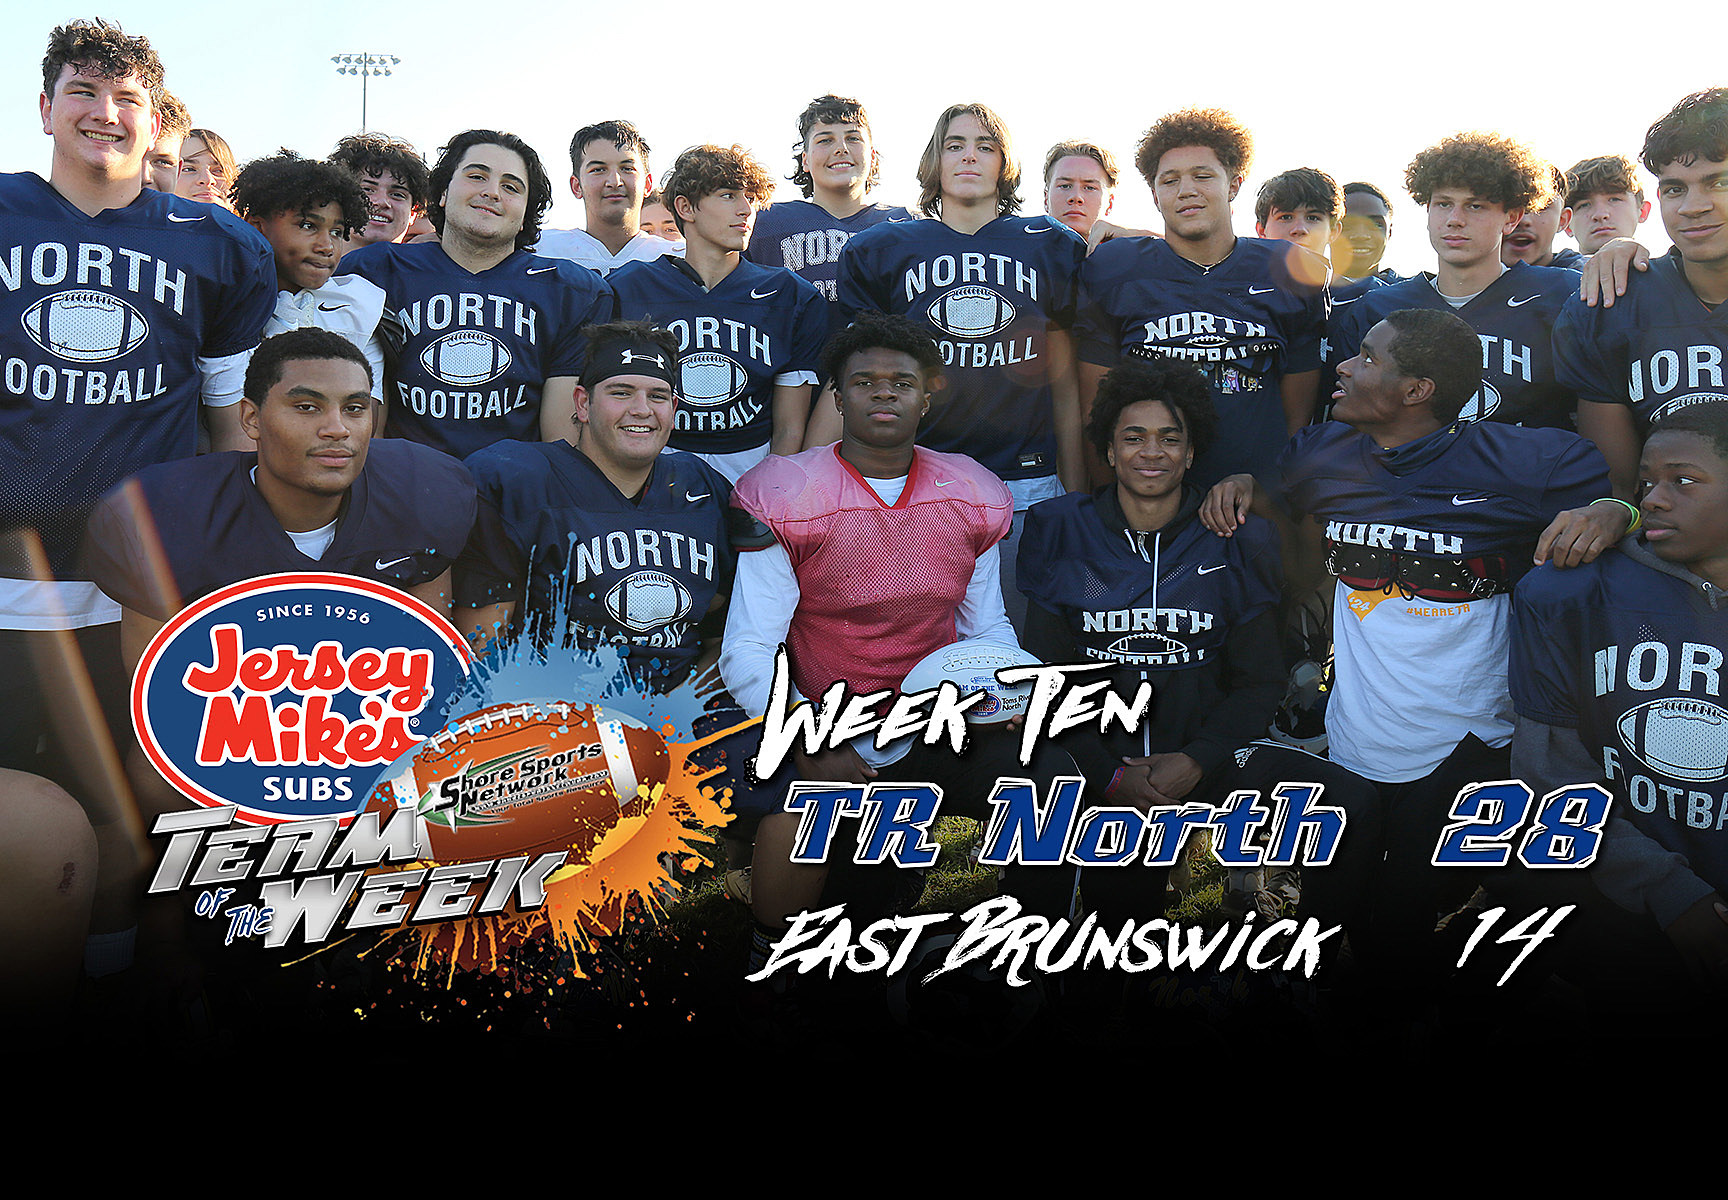 Toms River North is the Jersey Mike's Football Team of the Week